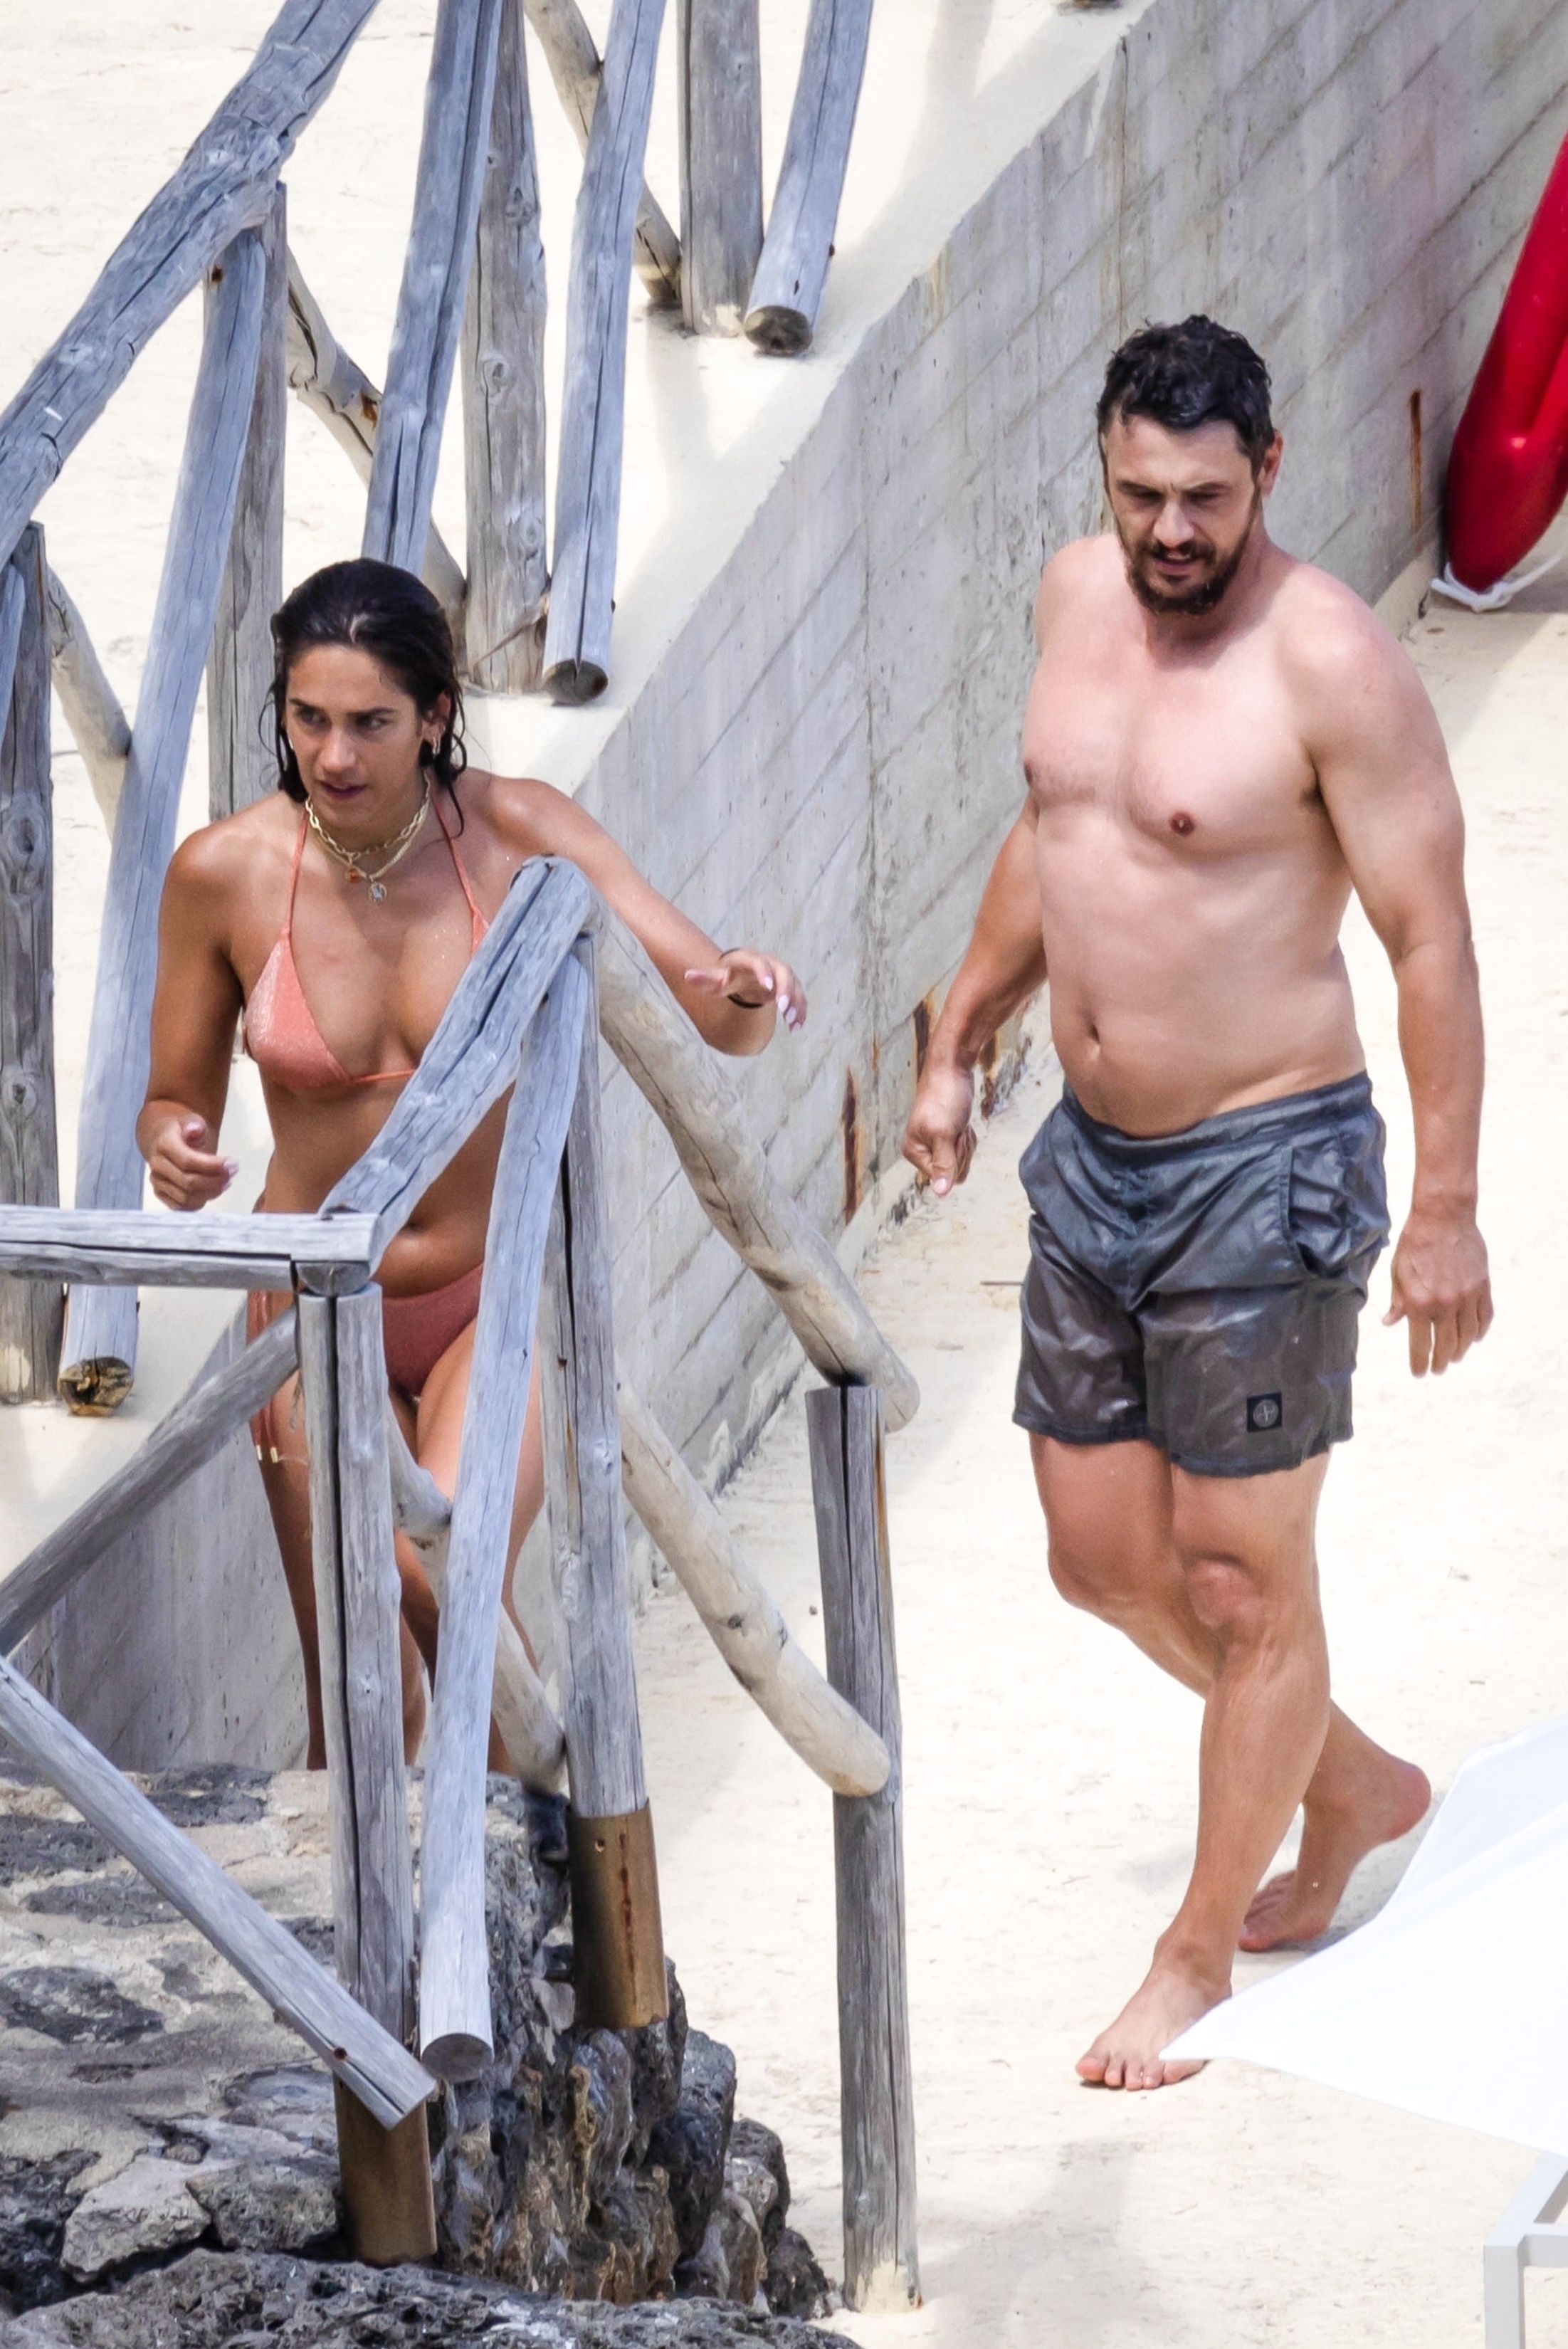 <p><a href="https://www.wonderwall.com/celebrity/profiles/overview/james-franco-301.article">James Franco</a> and girlfriend Isabel Pakzad enjoyed a relaxing day by the sea at Hotel Il Pellicano in Porto Ercole, Italy, on July 4.</p>